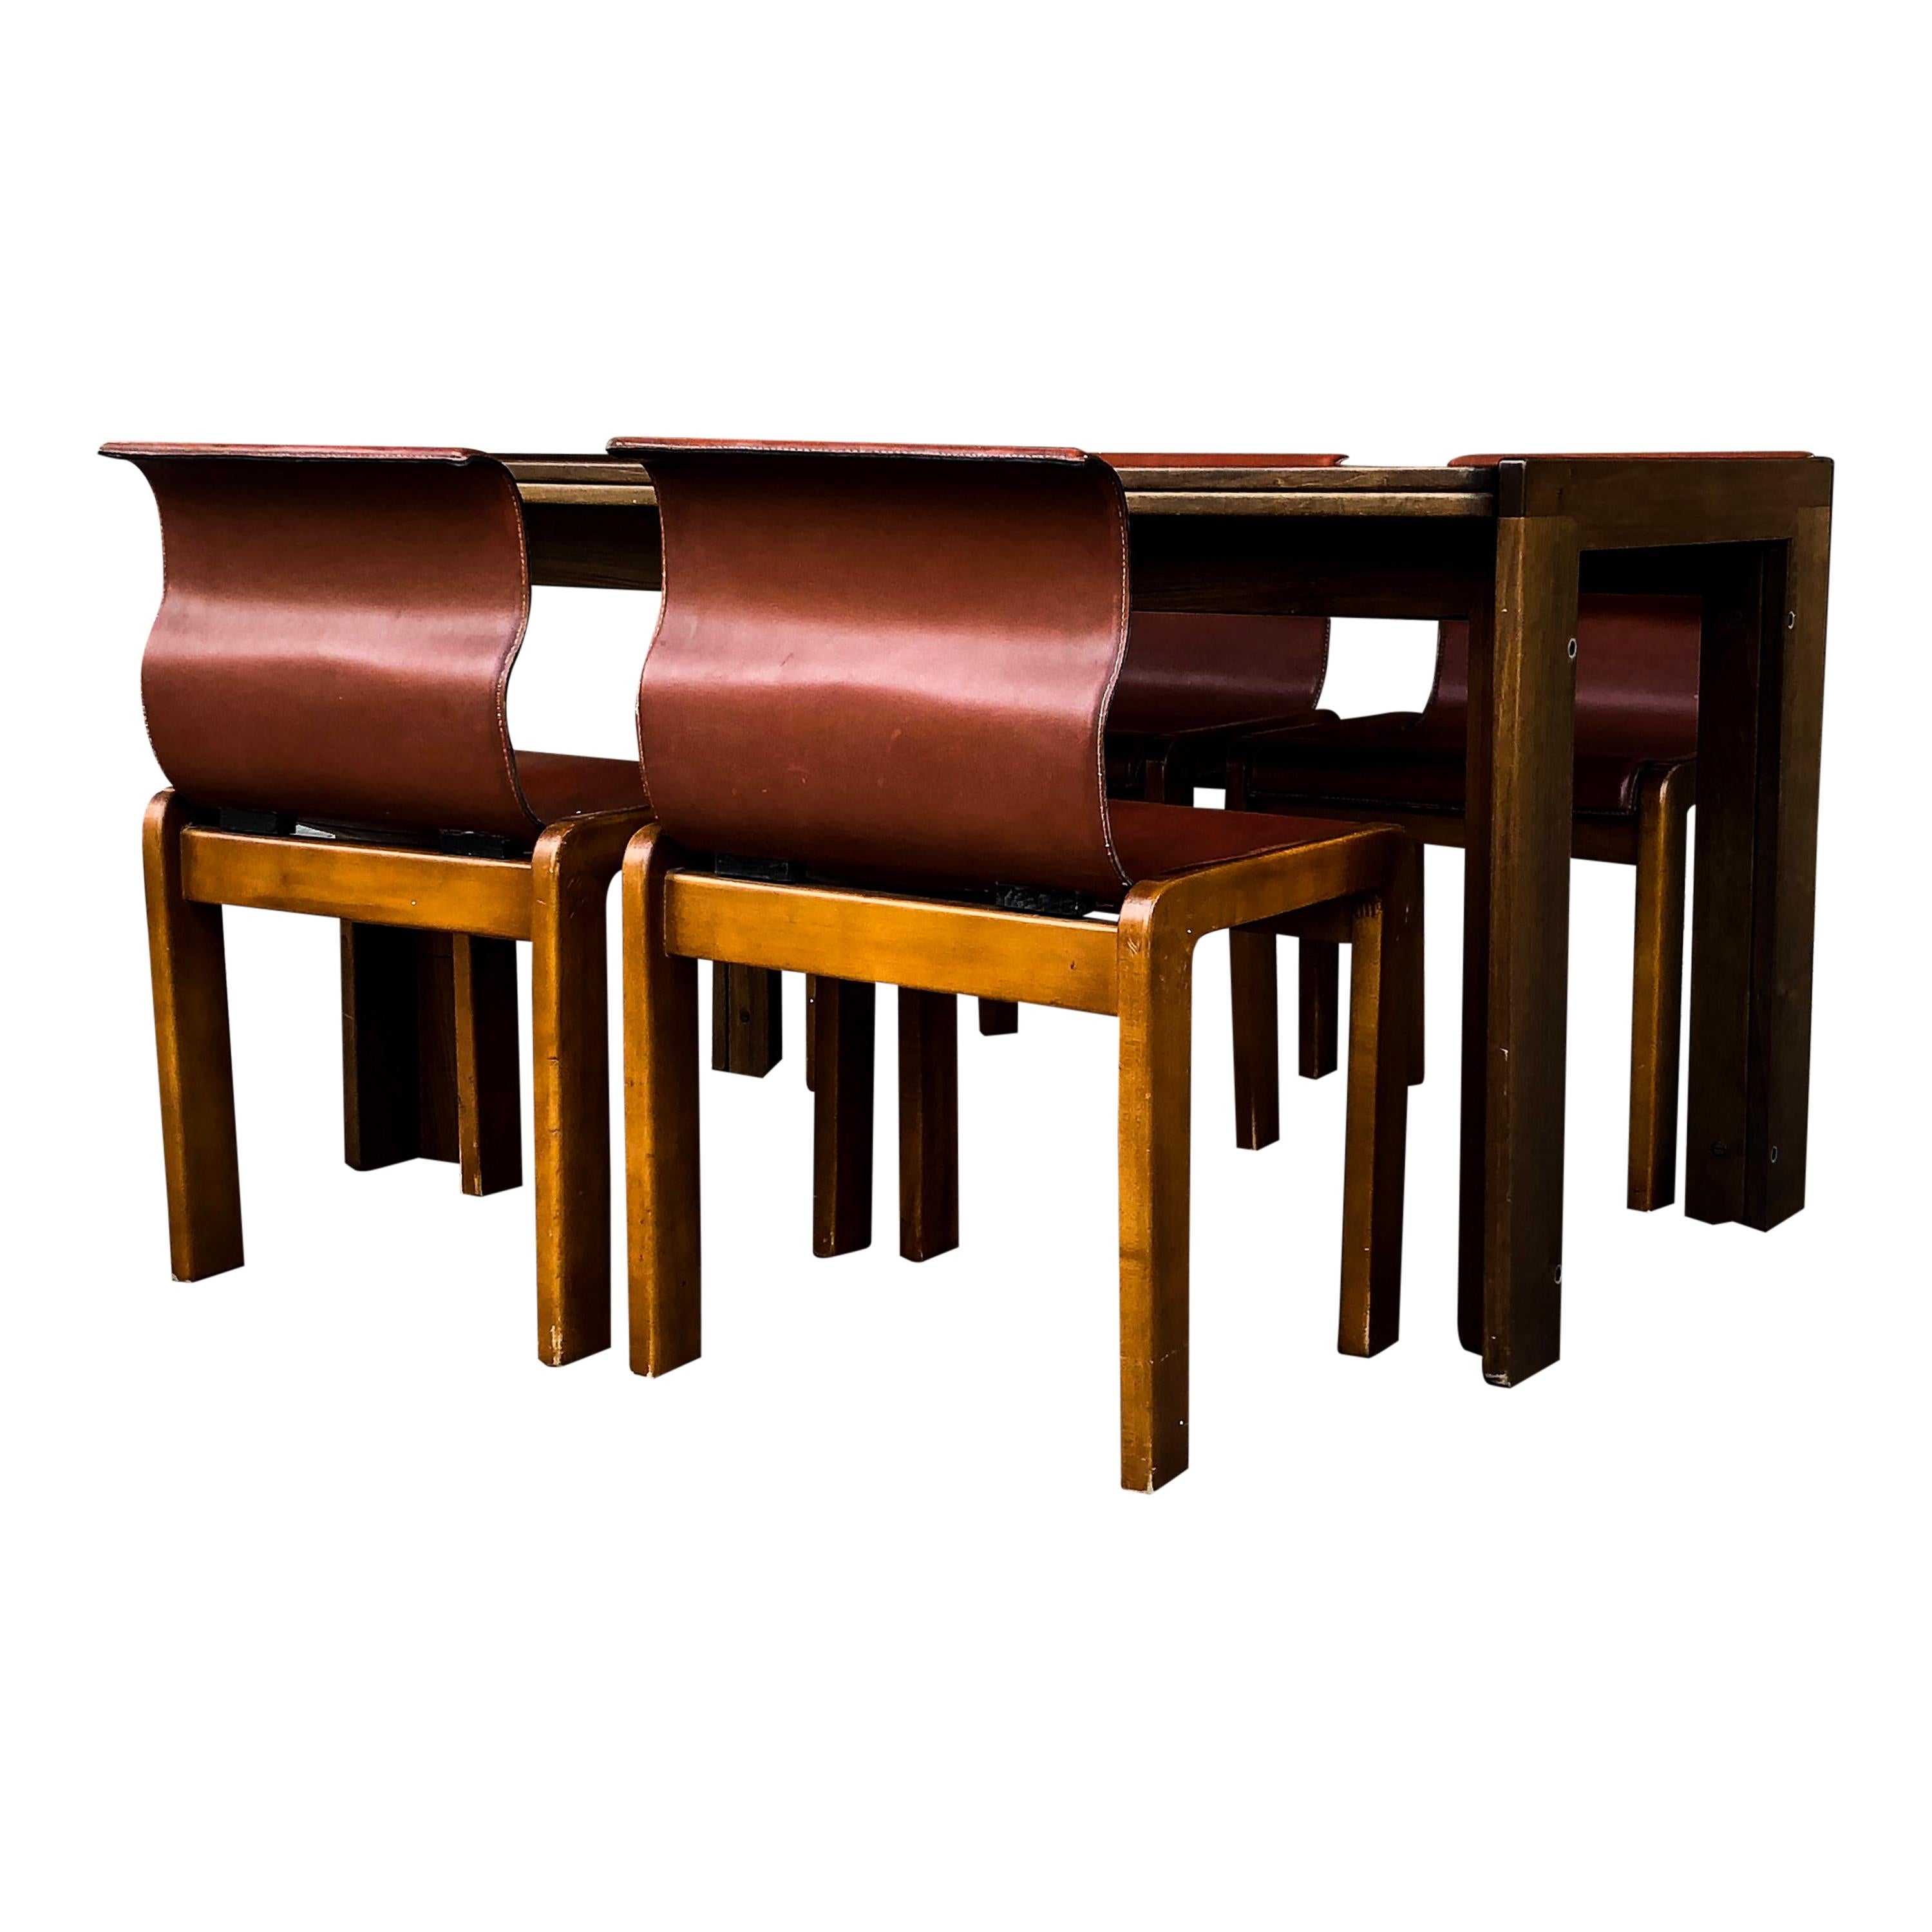 Afra & Tobia Scarpa Midcentury Leather and Plywood Dining Chair, 1966, Set of 4 For Sale 3